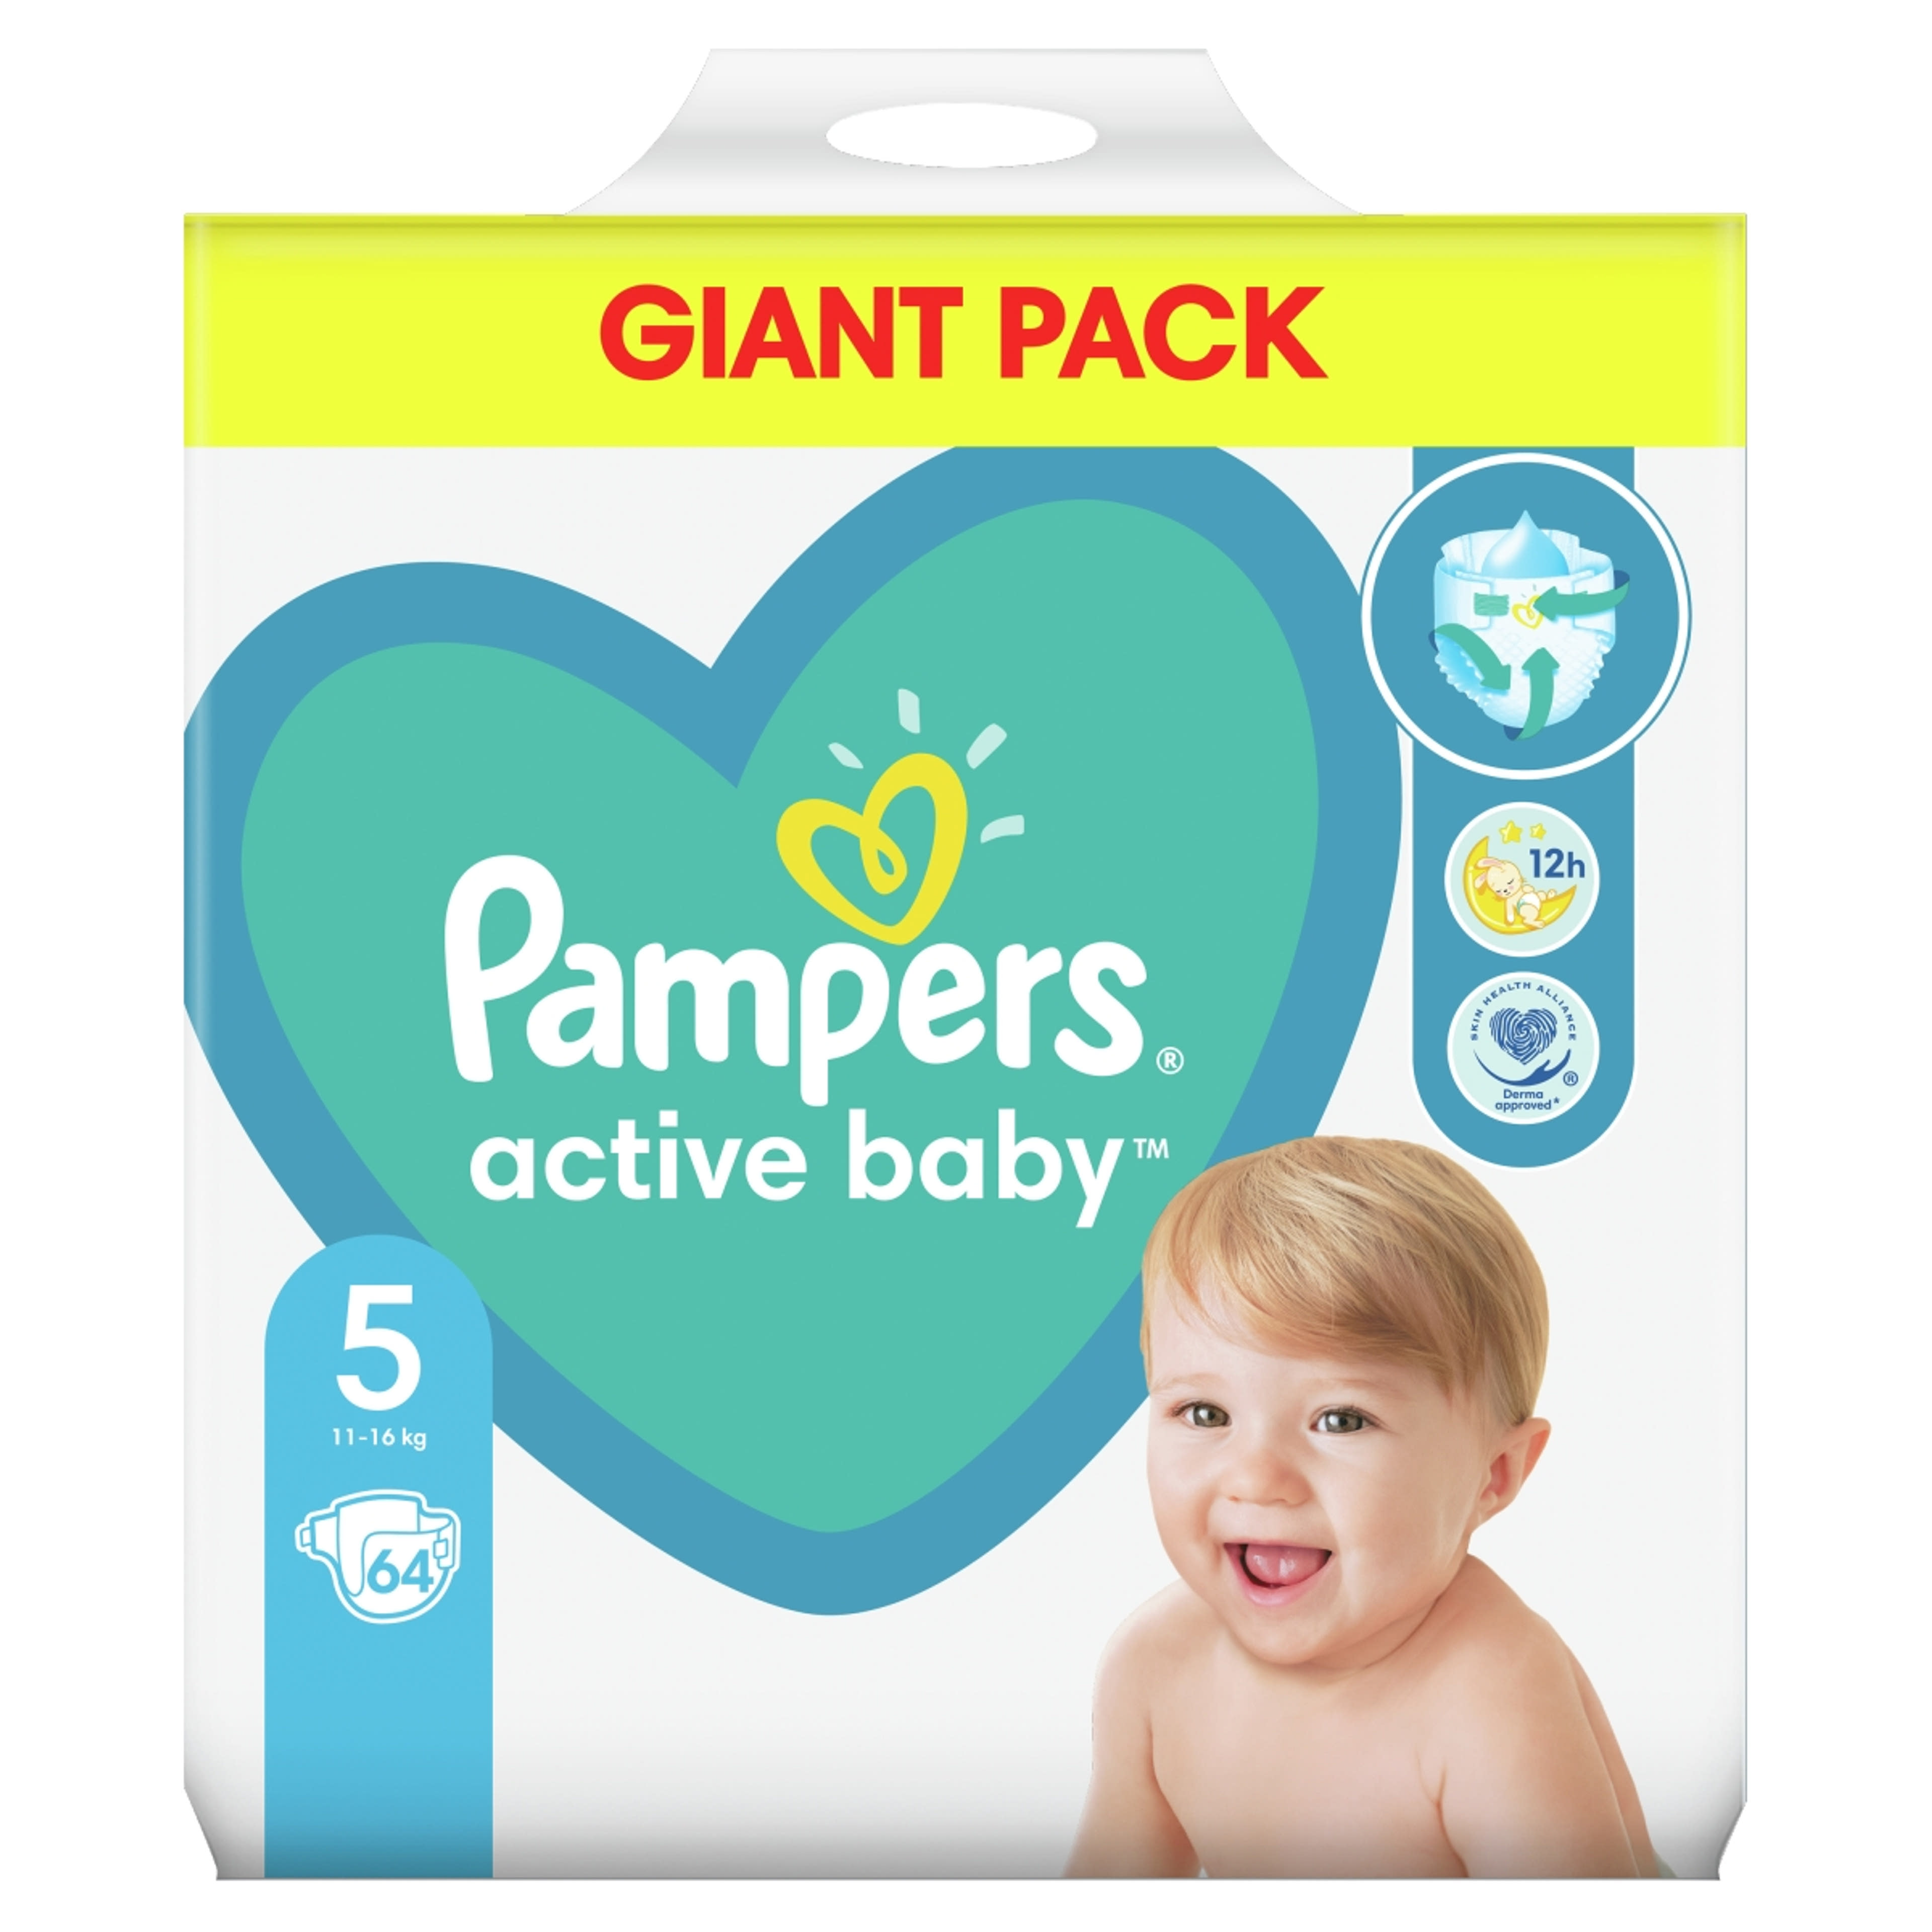 Pampers Active Baby Giant Pack Pelenka 5 - 64 db-1